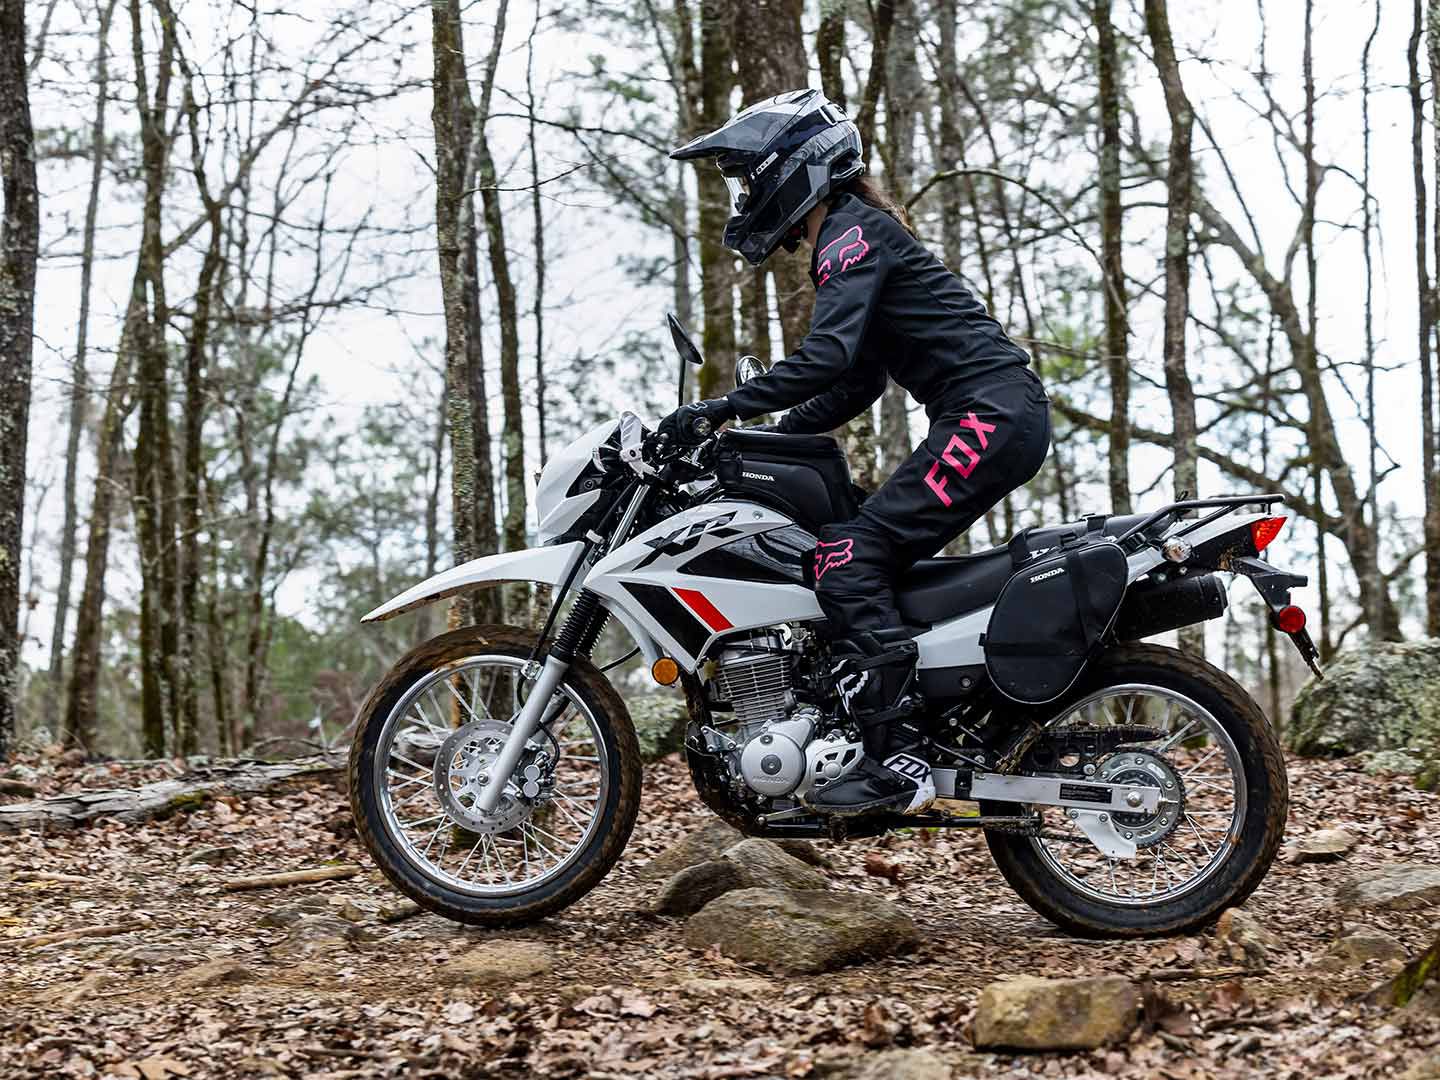 Honda will have accessories available for the new dual sport. The list of accessories includes a dual sport tank bag, dual sport saddlebags, hand guards, skid plate, and a 12-volt accessory socket.